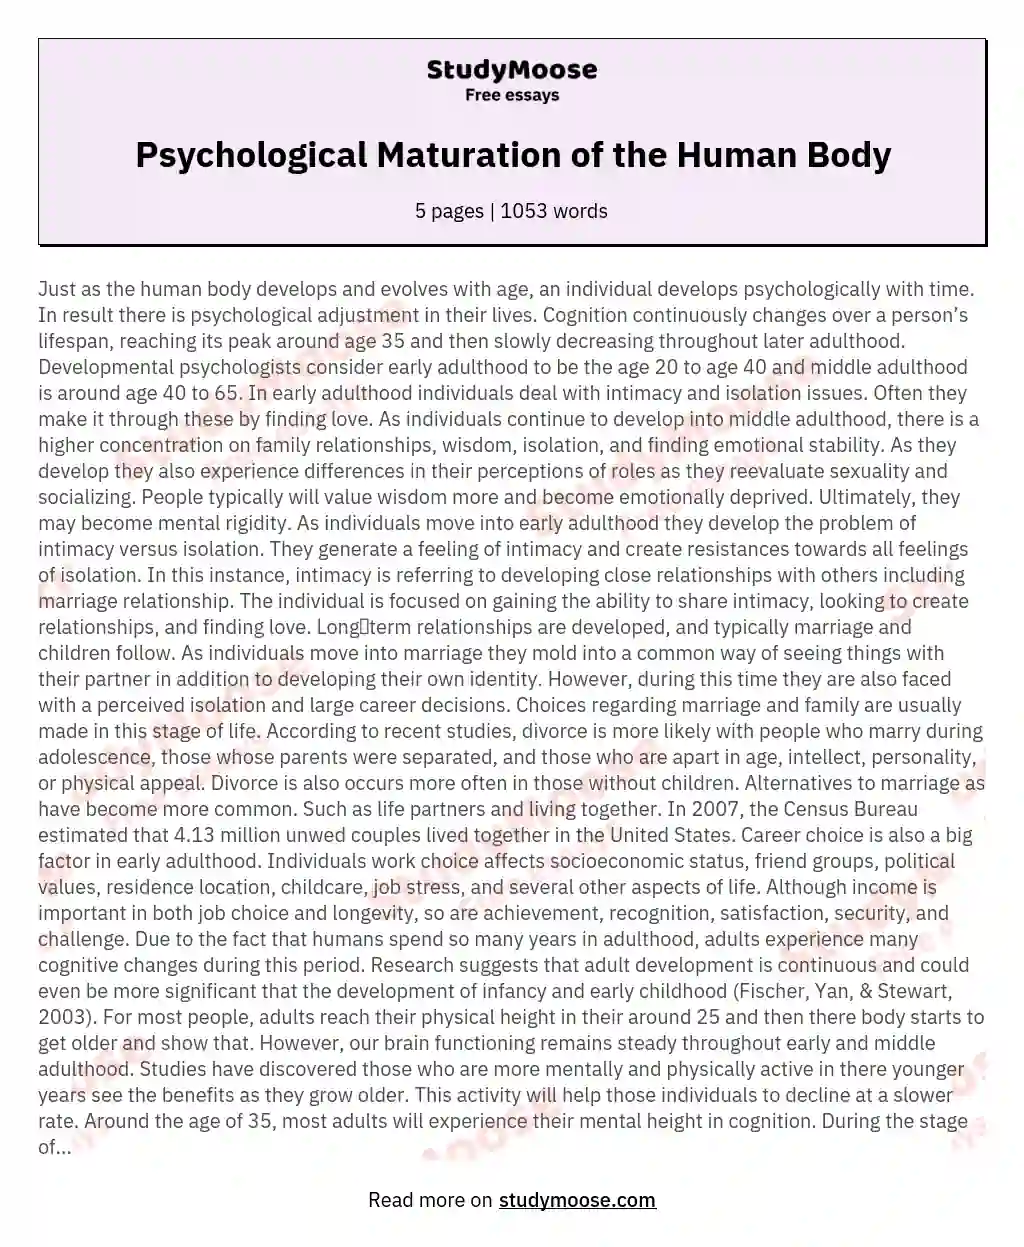 Psychological Maturation of the Human Body essay